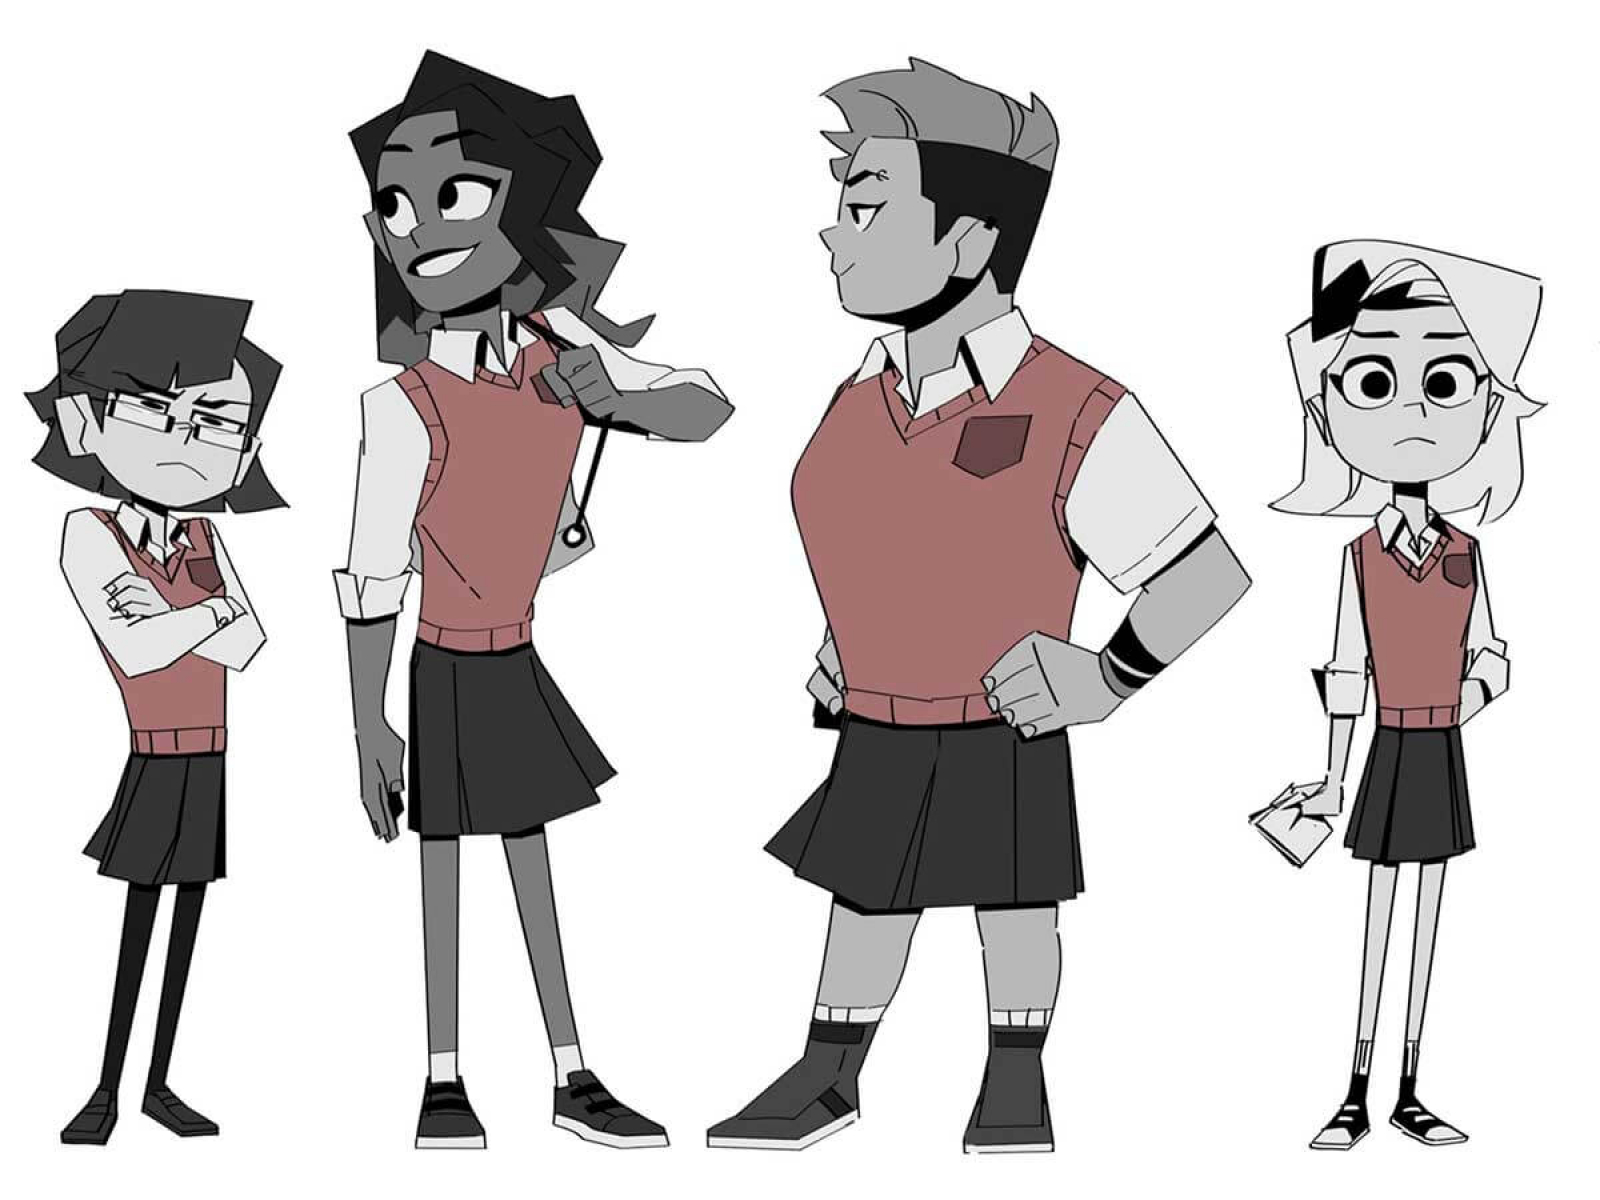 Concept art of various characterized students in a red school uniform.